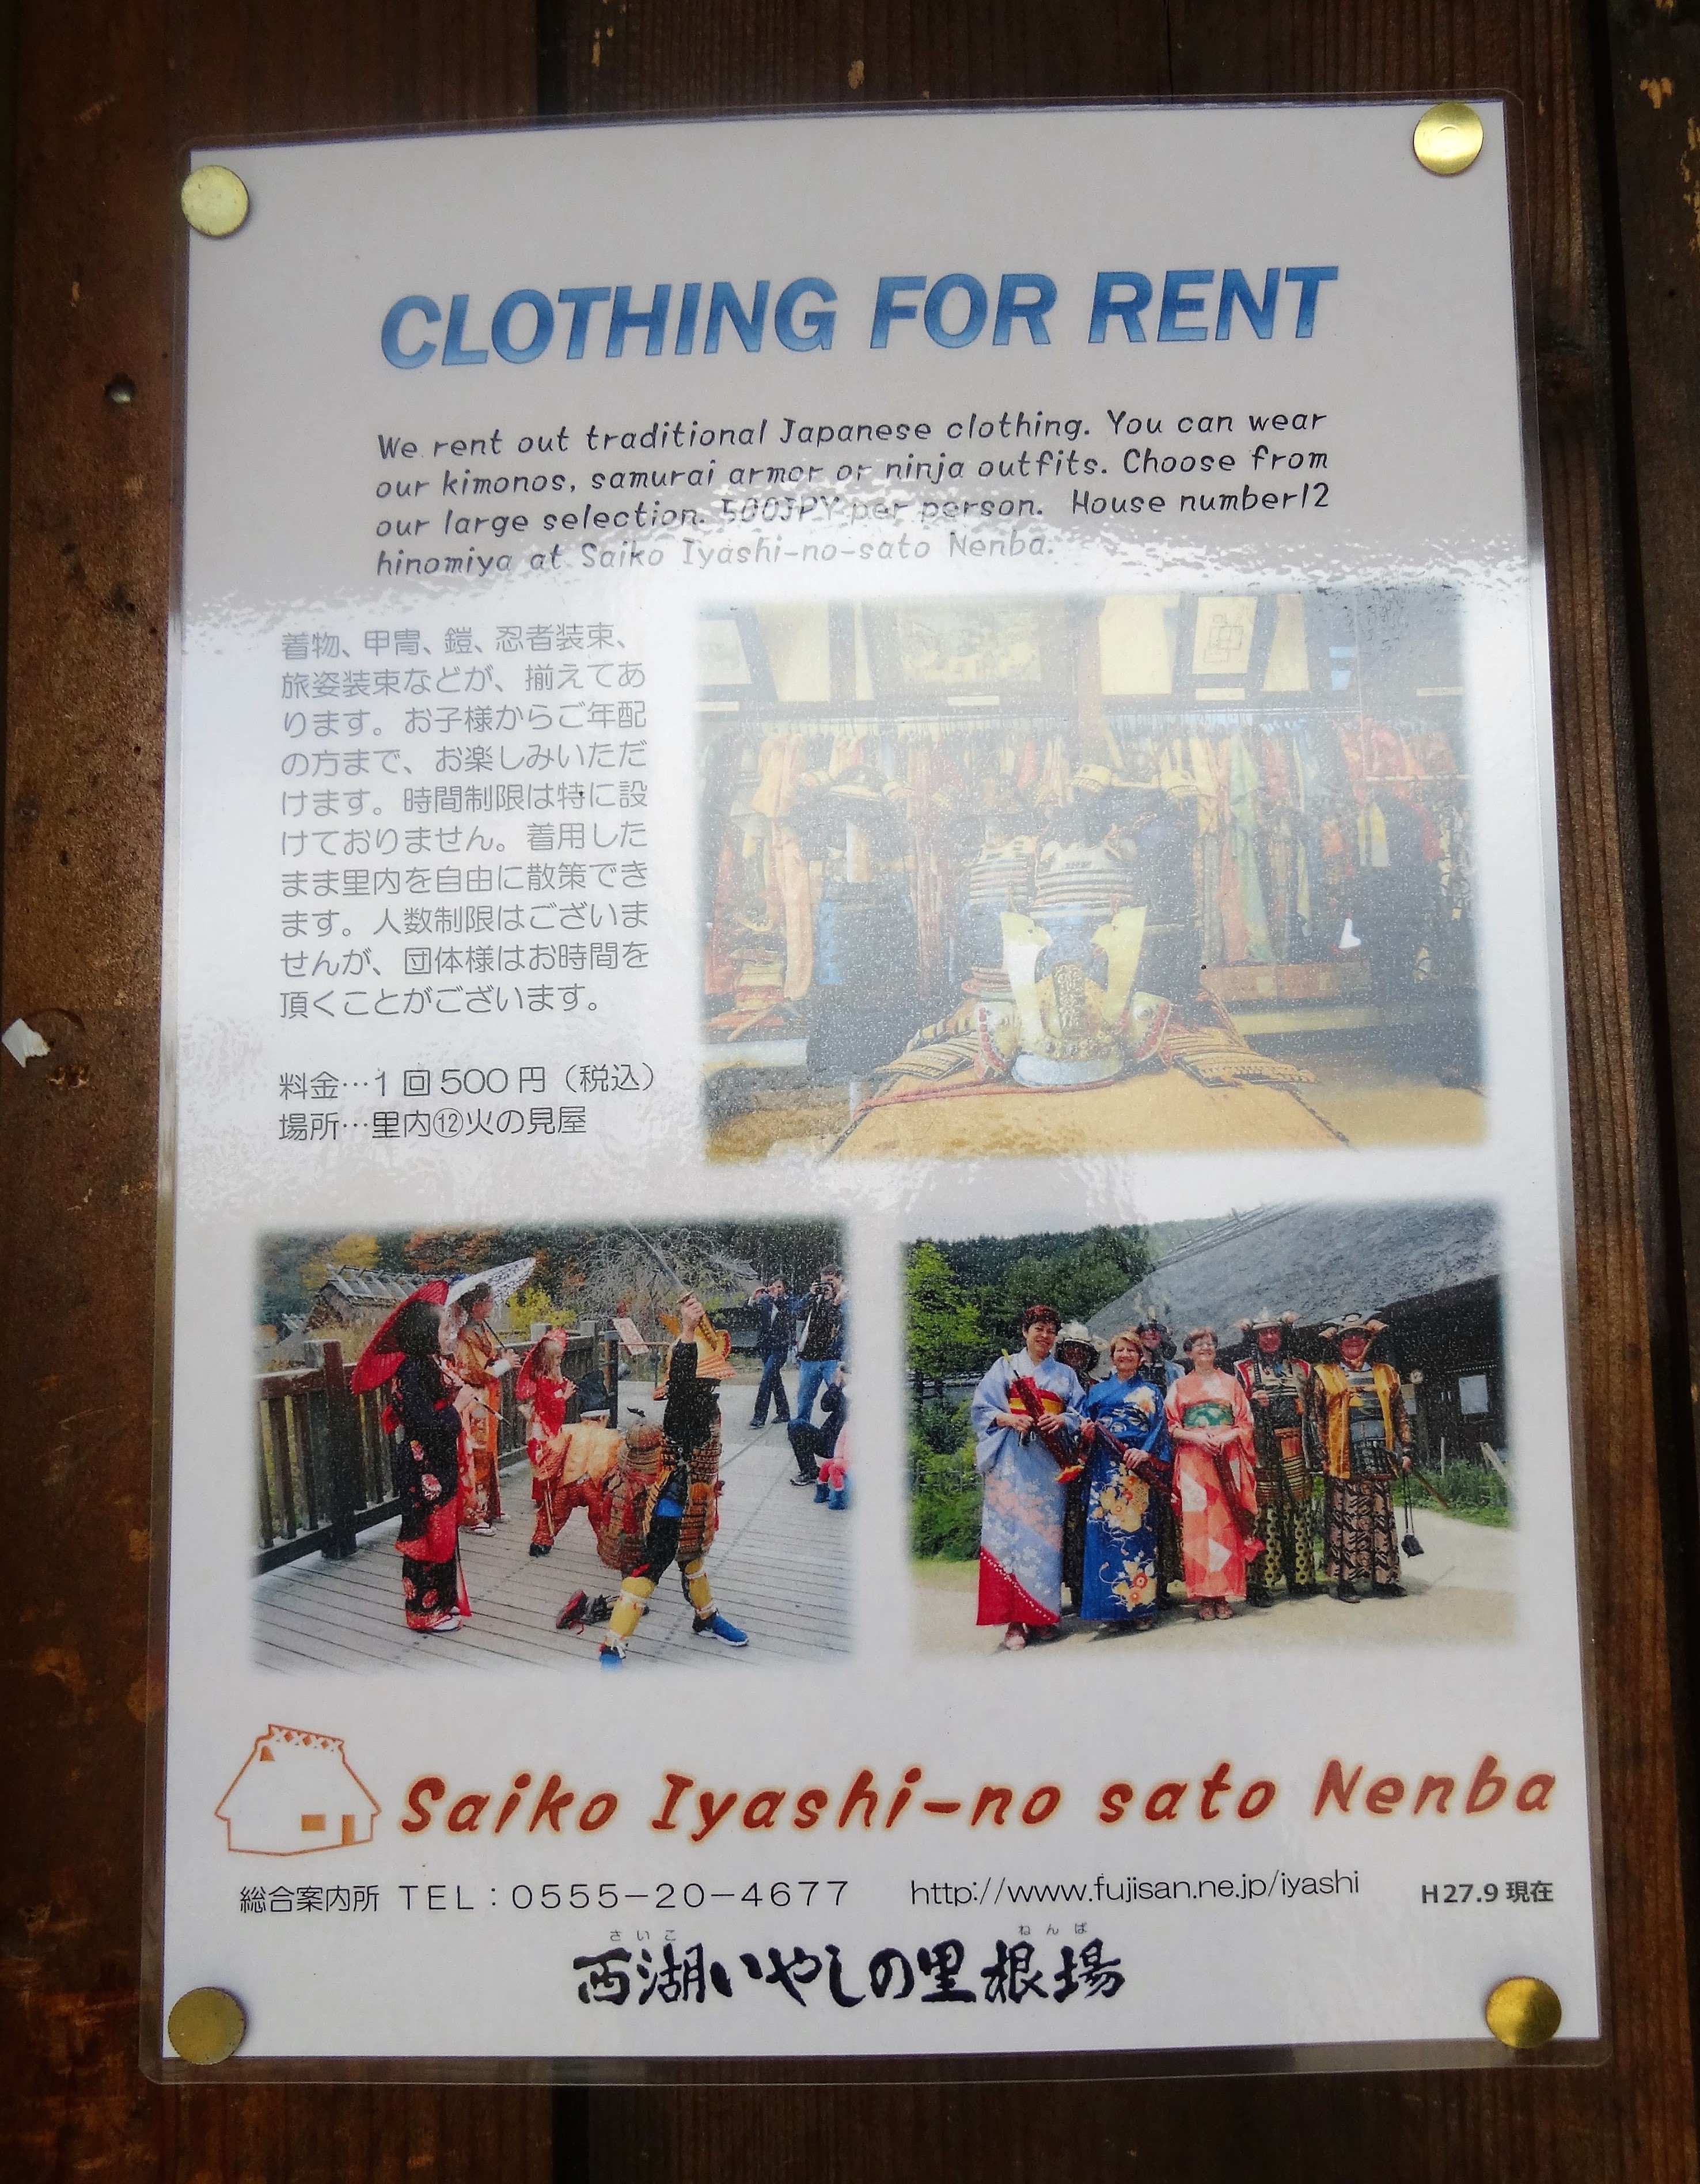 Lamenated poster with bilingual text. The English reads: 'Clothing for rent': We rend out traditional Japanese clothing. You can wear our kimonos, samurai armor or ninja outfits. Choose from our large collection [text illegible]/ House Number12 [text illegible]"